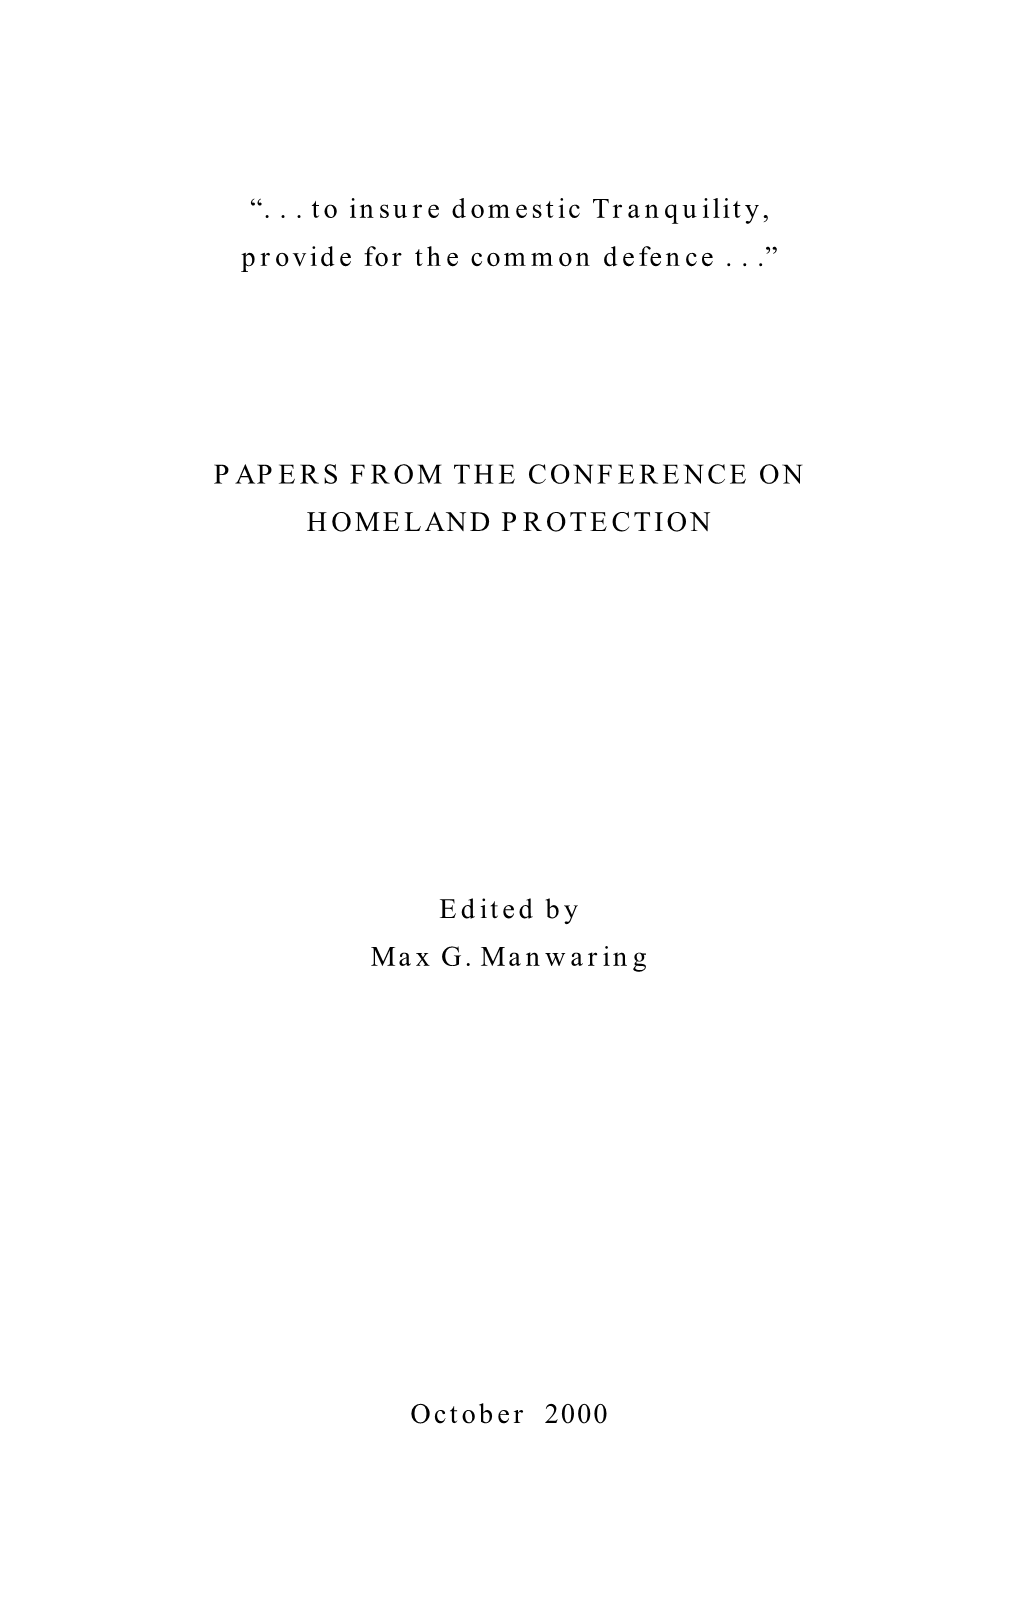 Papers from the Conference on Homeland Protection